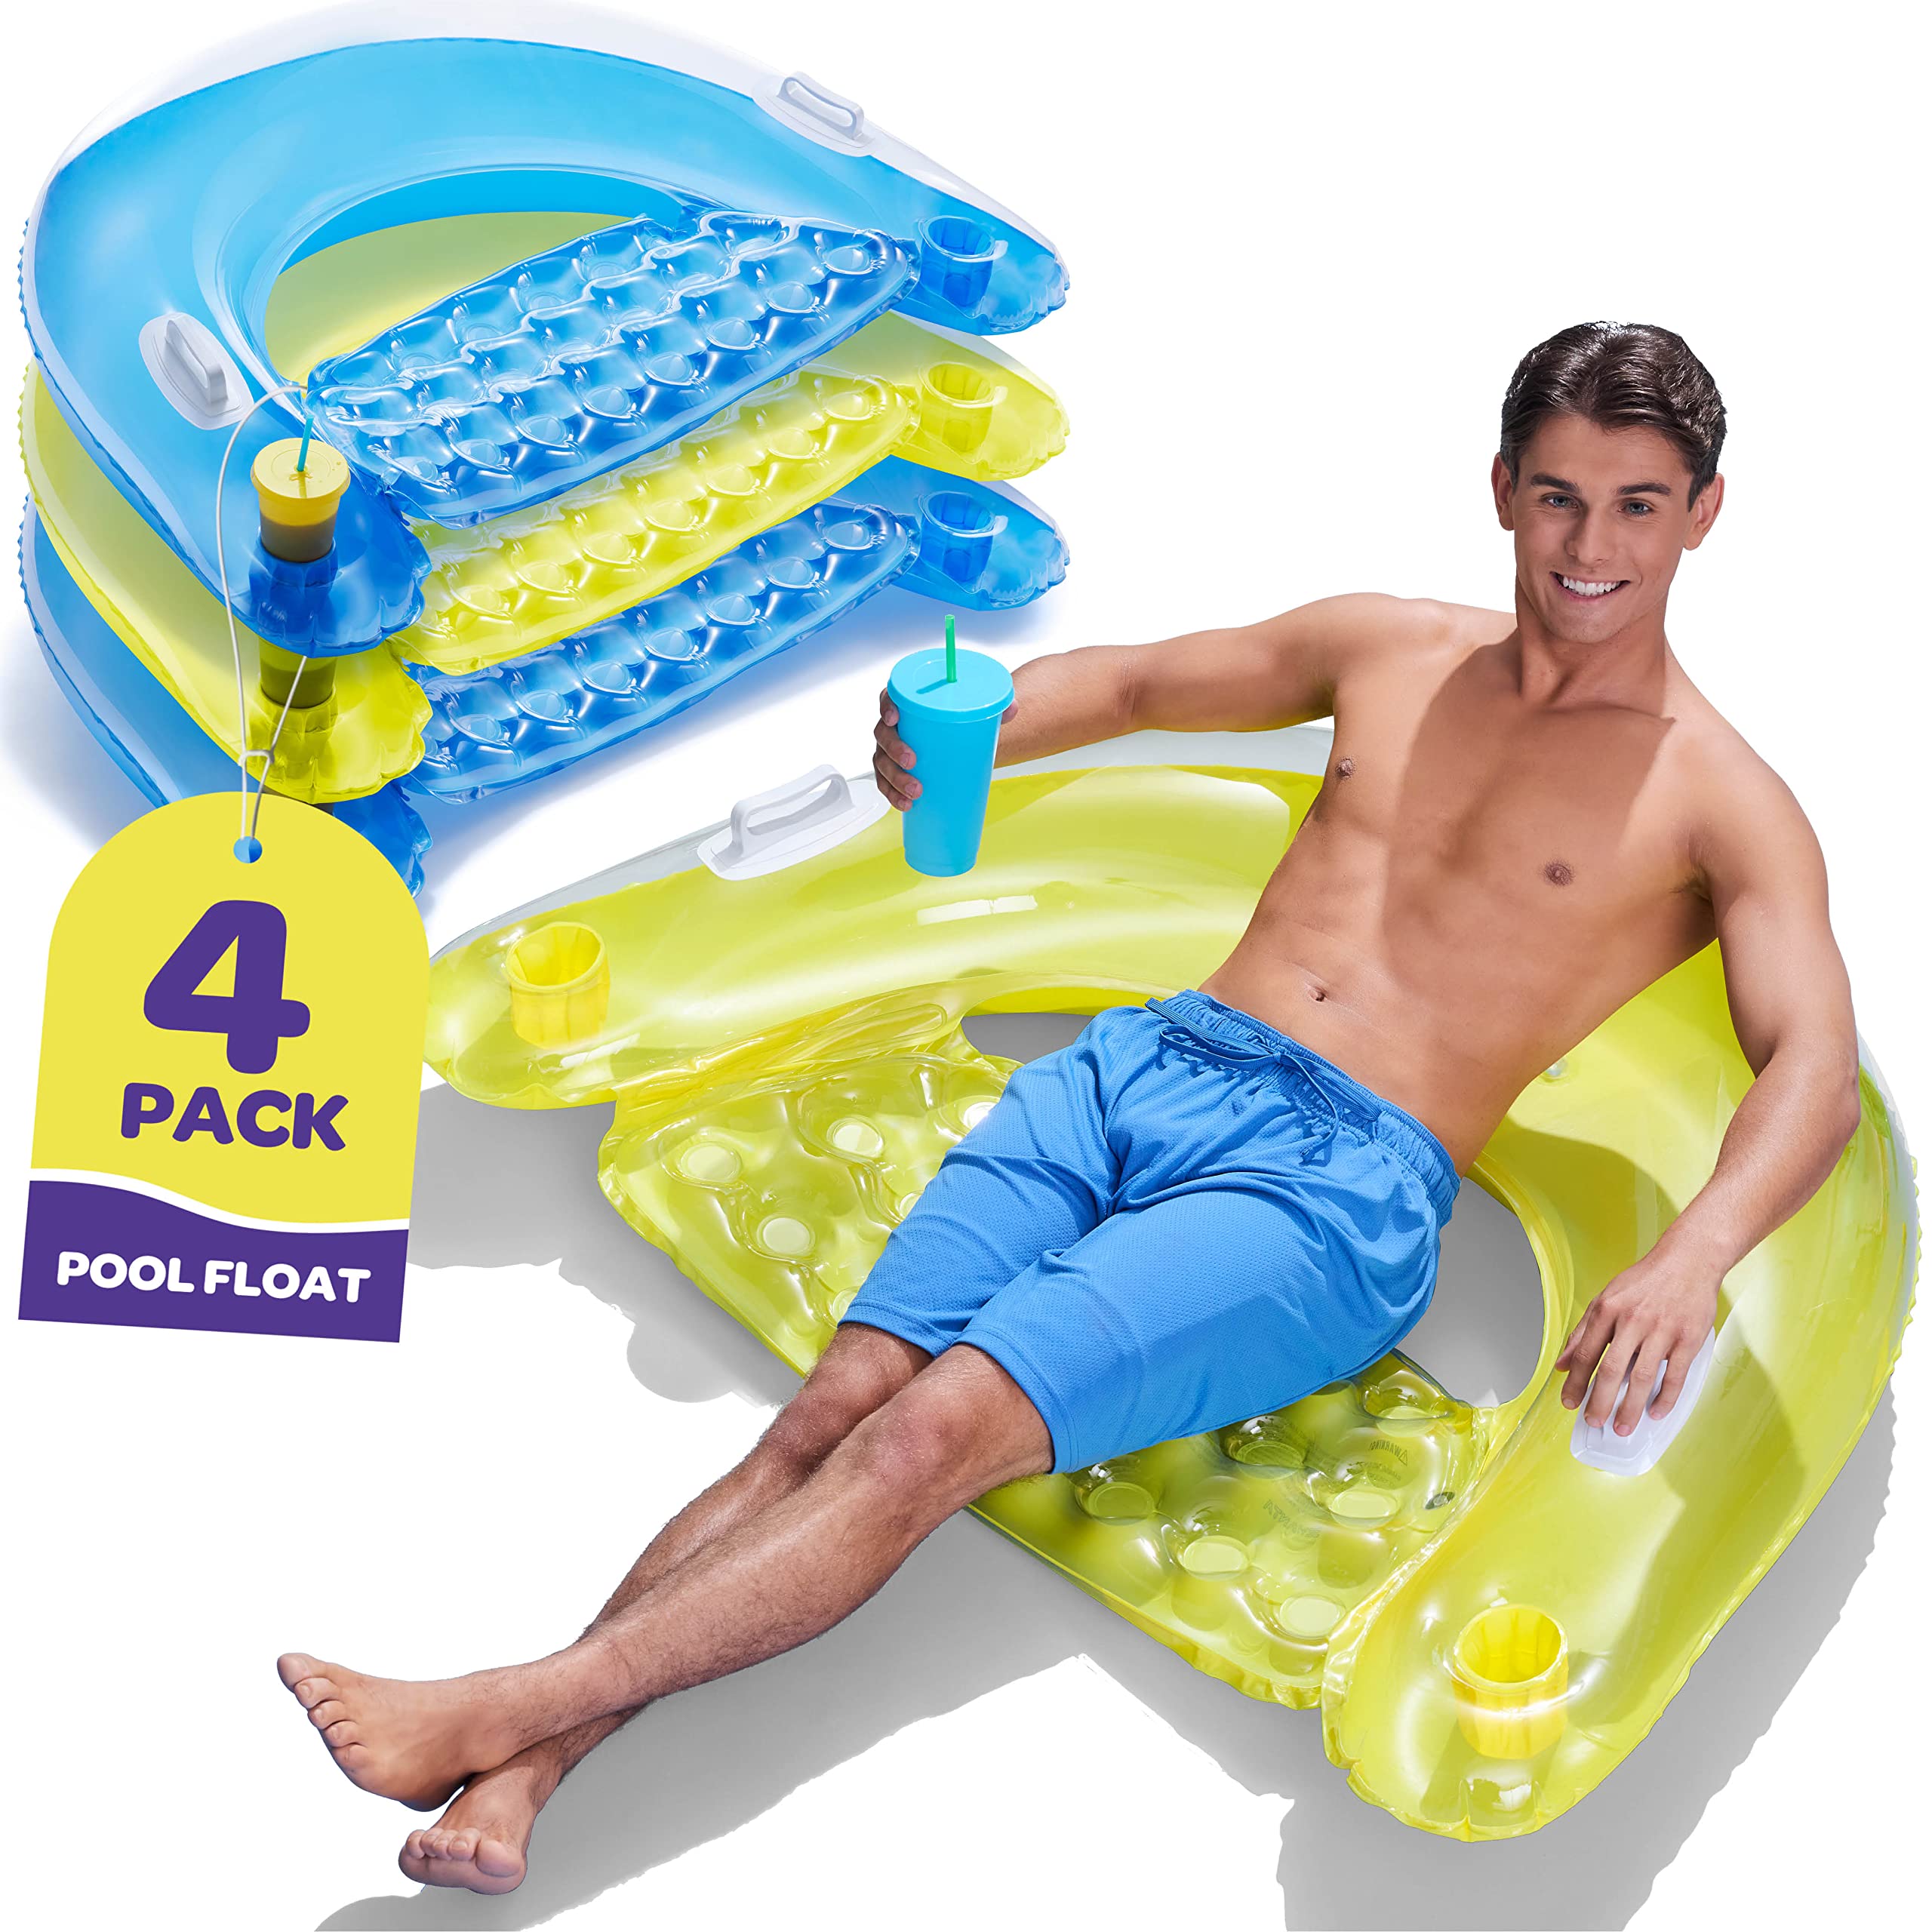 Pool Floats Adult [Set of 4] Inflatable Chair Floats with Cup Holders & Handles - Happy Colorful Pool Floaties - Pool Float Comes in 2 Fun Colors, Blue & Yellow, A Relaxing Floats for Swimming Pool  - Like New